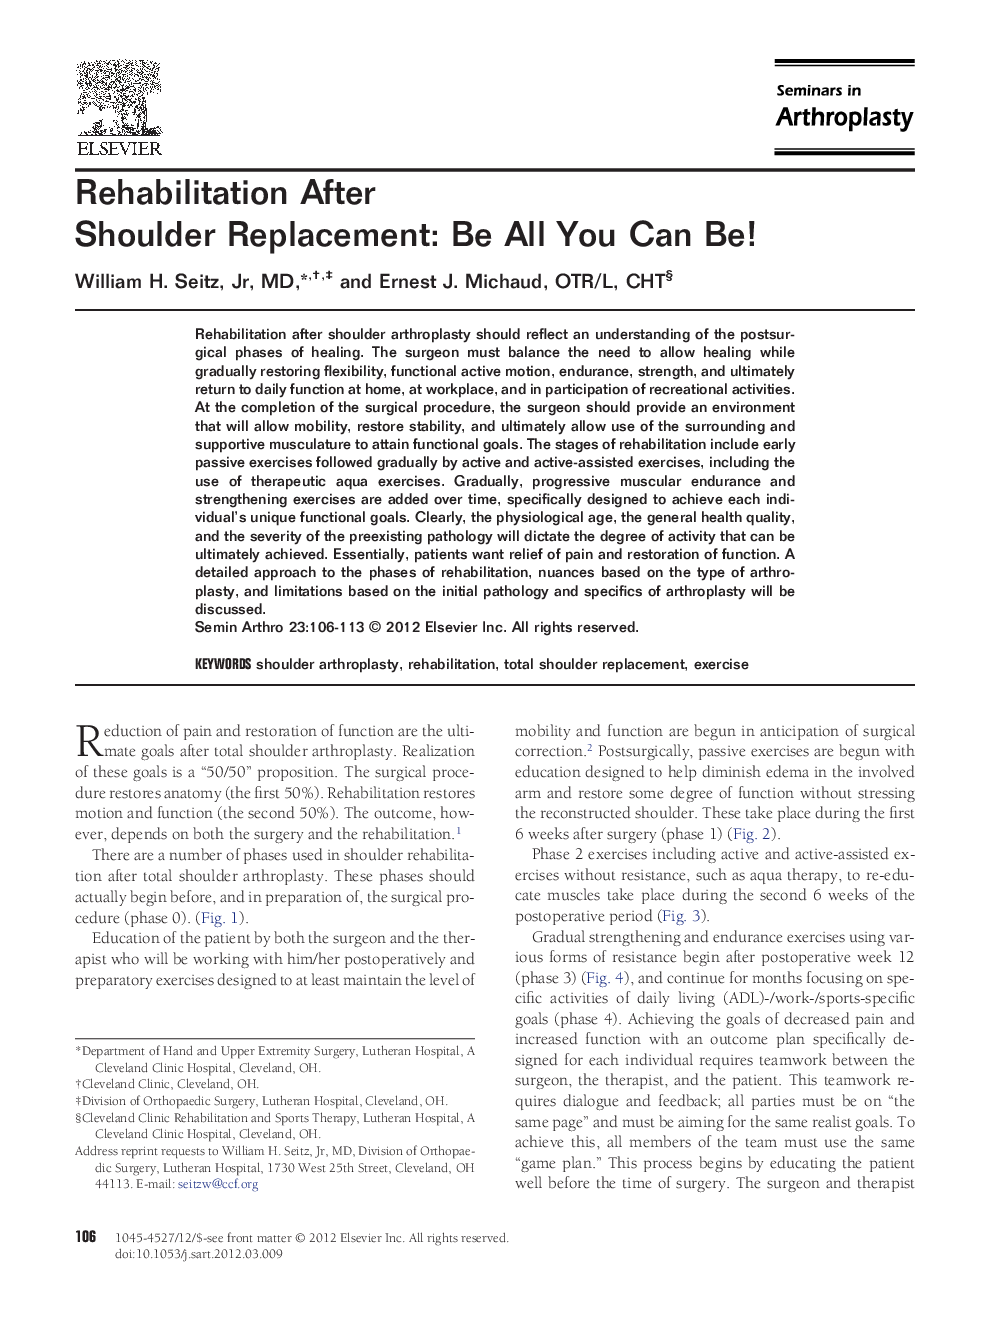 Rehabilitation After Shoulder Replacement: Be All You Can Be!